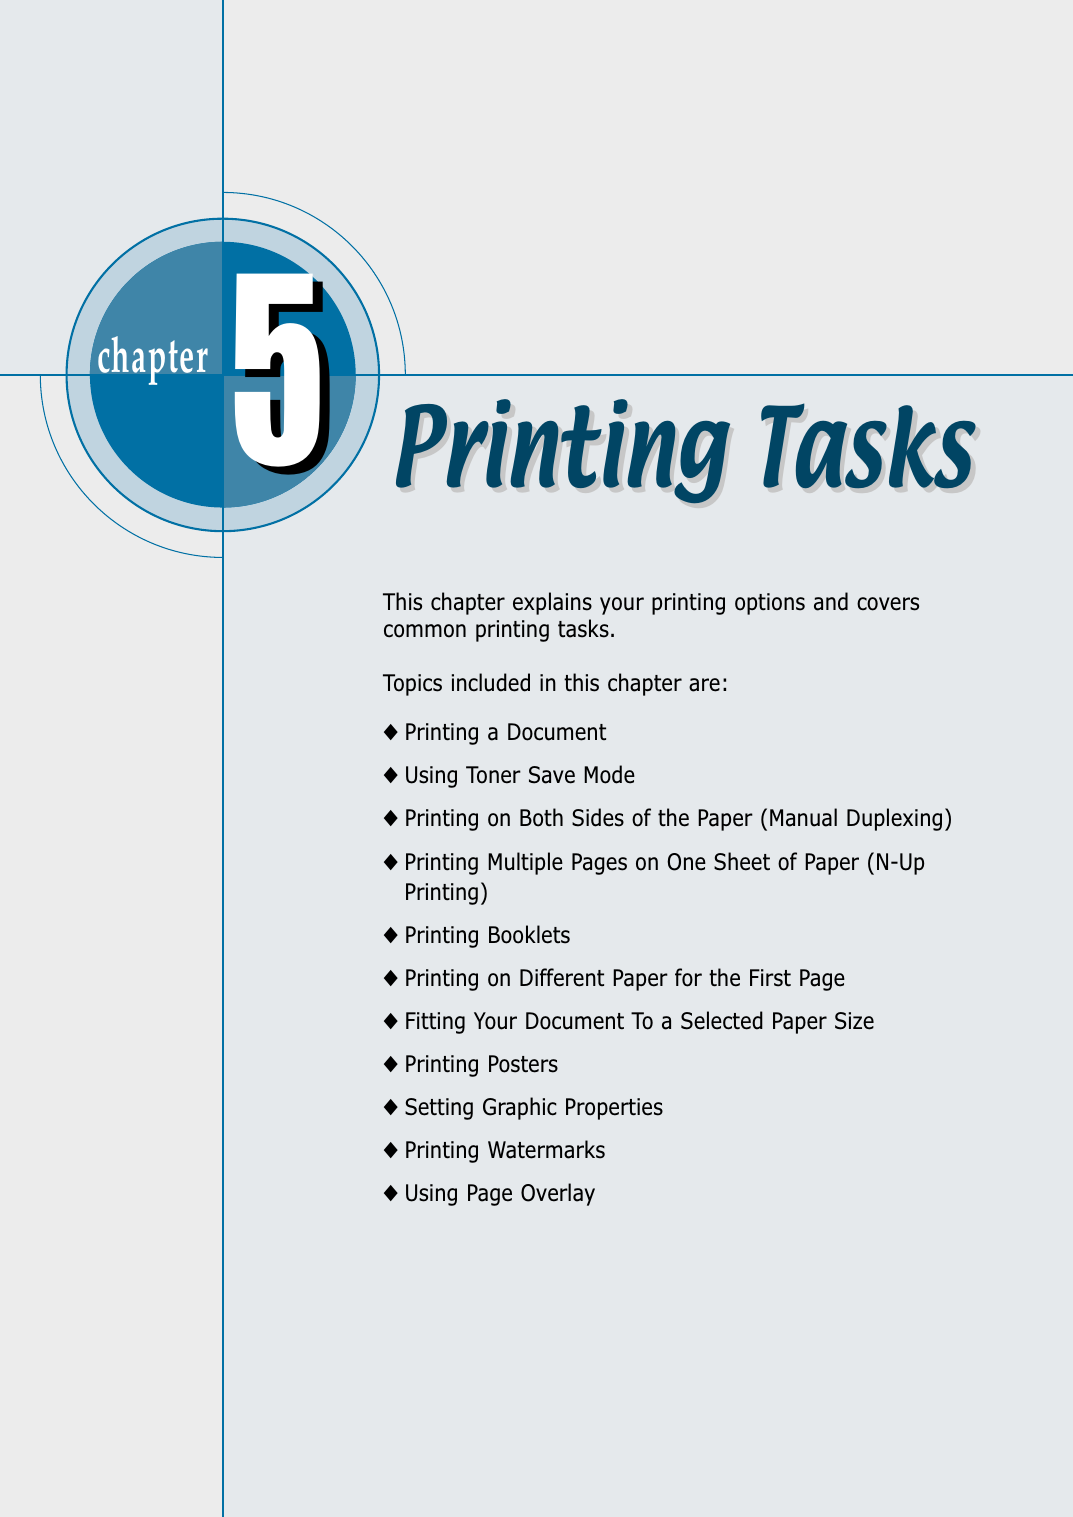 chapter  This chapter explains your printing options and coverscommon printing tasks.Topics included in this chapter are:◆ Printing a Document◆ Using Toner Save Mode◆ Printing on Both Sides of the Paper (Manual Duplexing)◆ Printing Multiple Pages on One Sheet of Paper (N-UpPrinting)◆ Printing Booklets◆ Printing on Different Paper for the First Page◆ Fitting Your Document To a Selected Paper Size ◆ Printing Posters◆ Setting Graphic Properties◆ Printing Watermarks◆ Using Page Overlay55Printing TasksPrinting Tasks